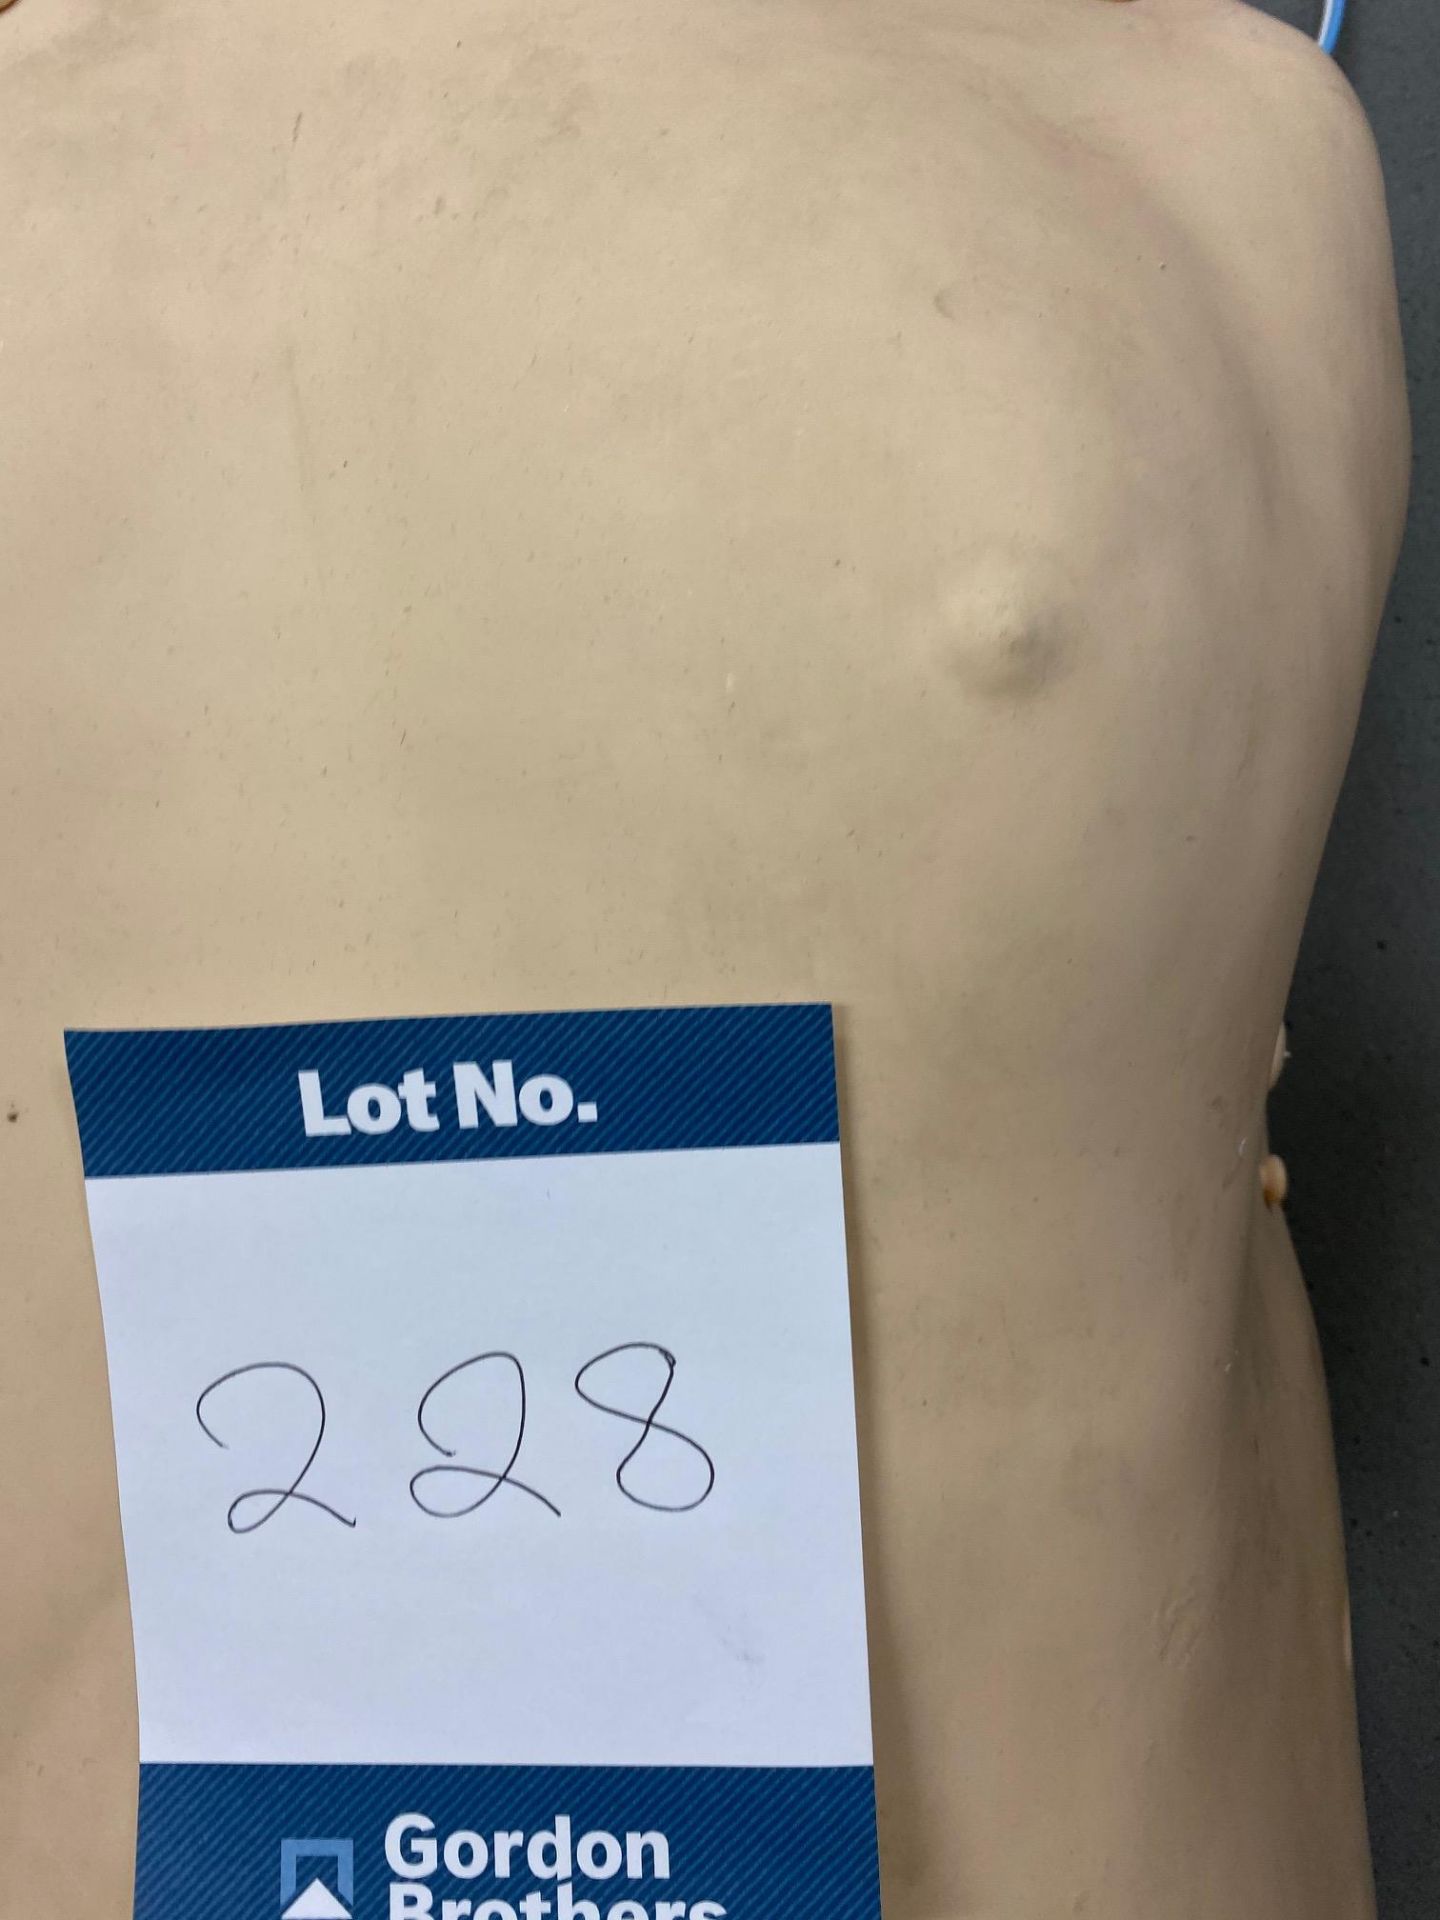 Skill trainer defibrillate training mannequin with carry case and connection cable - Image 4 of 4